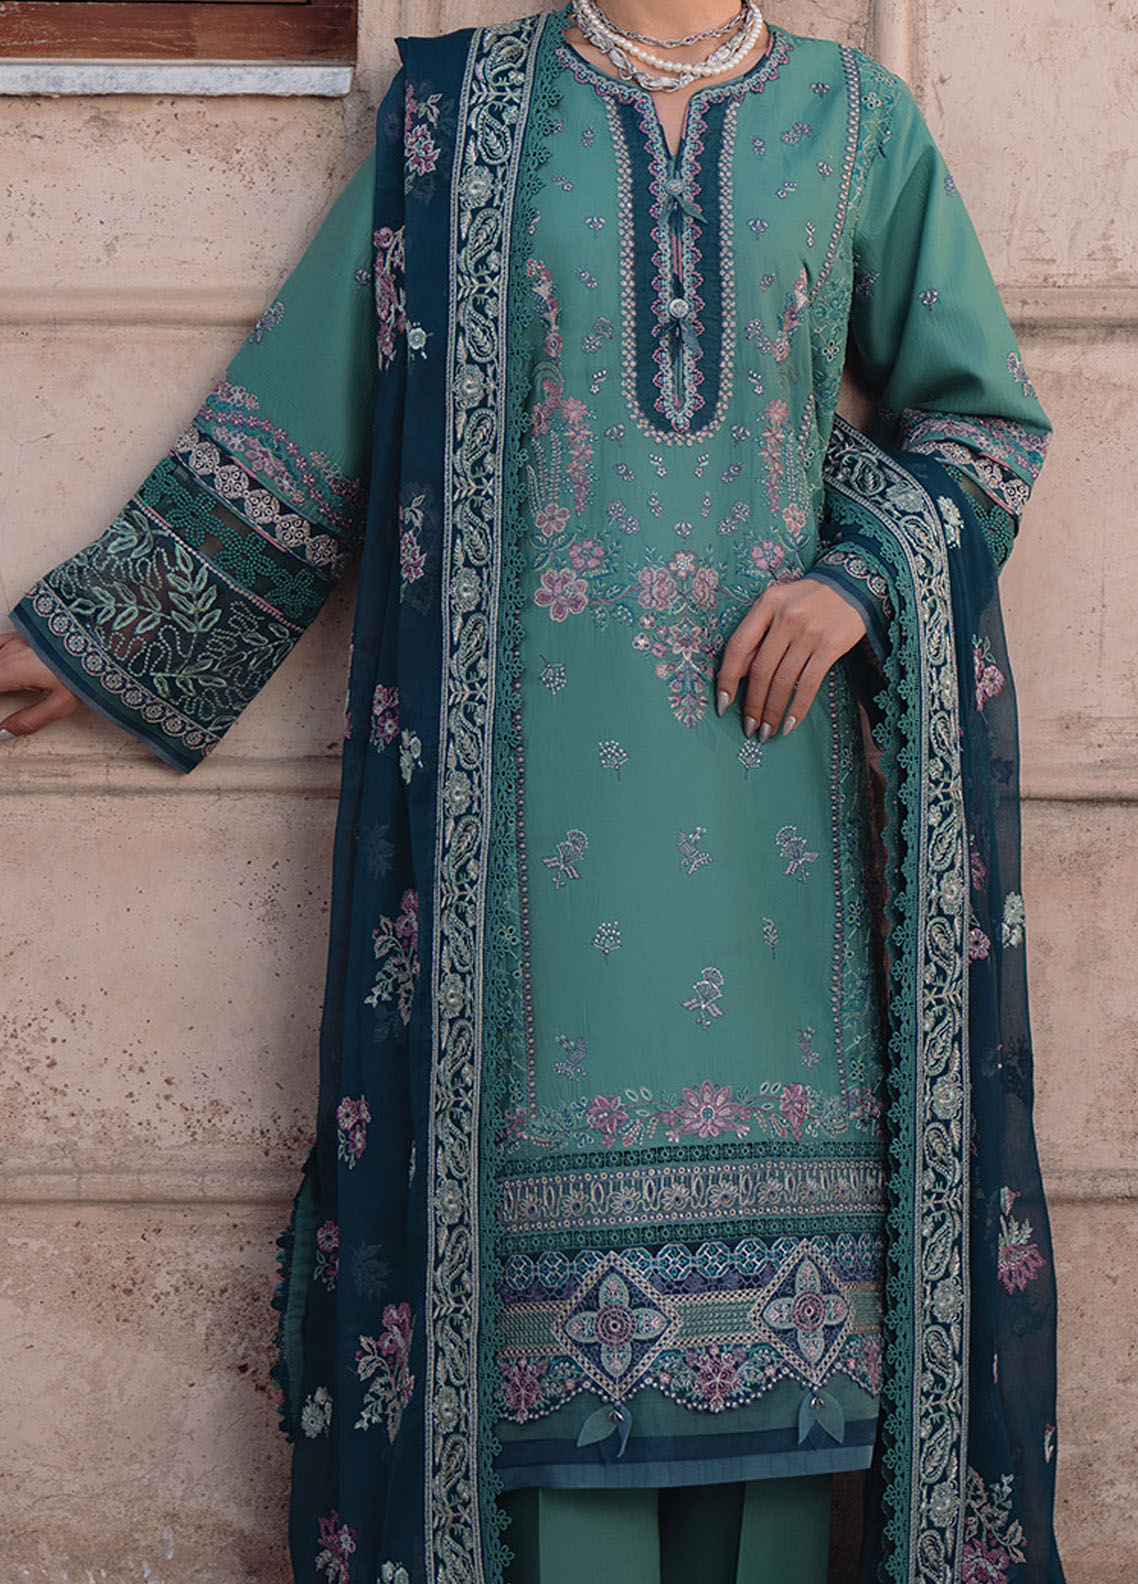 Farozaan By Xenia Formals Lawn Collection 2024 12 Zevah